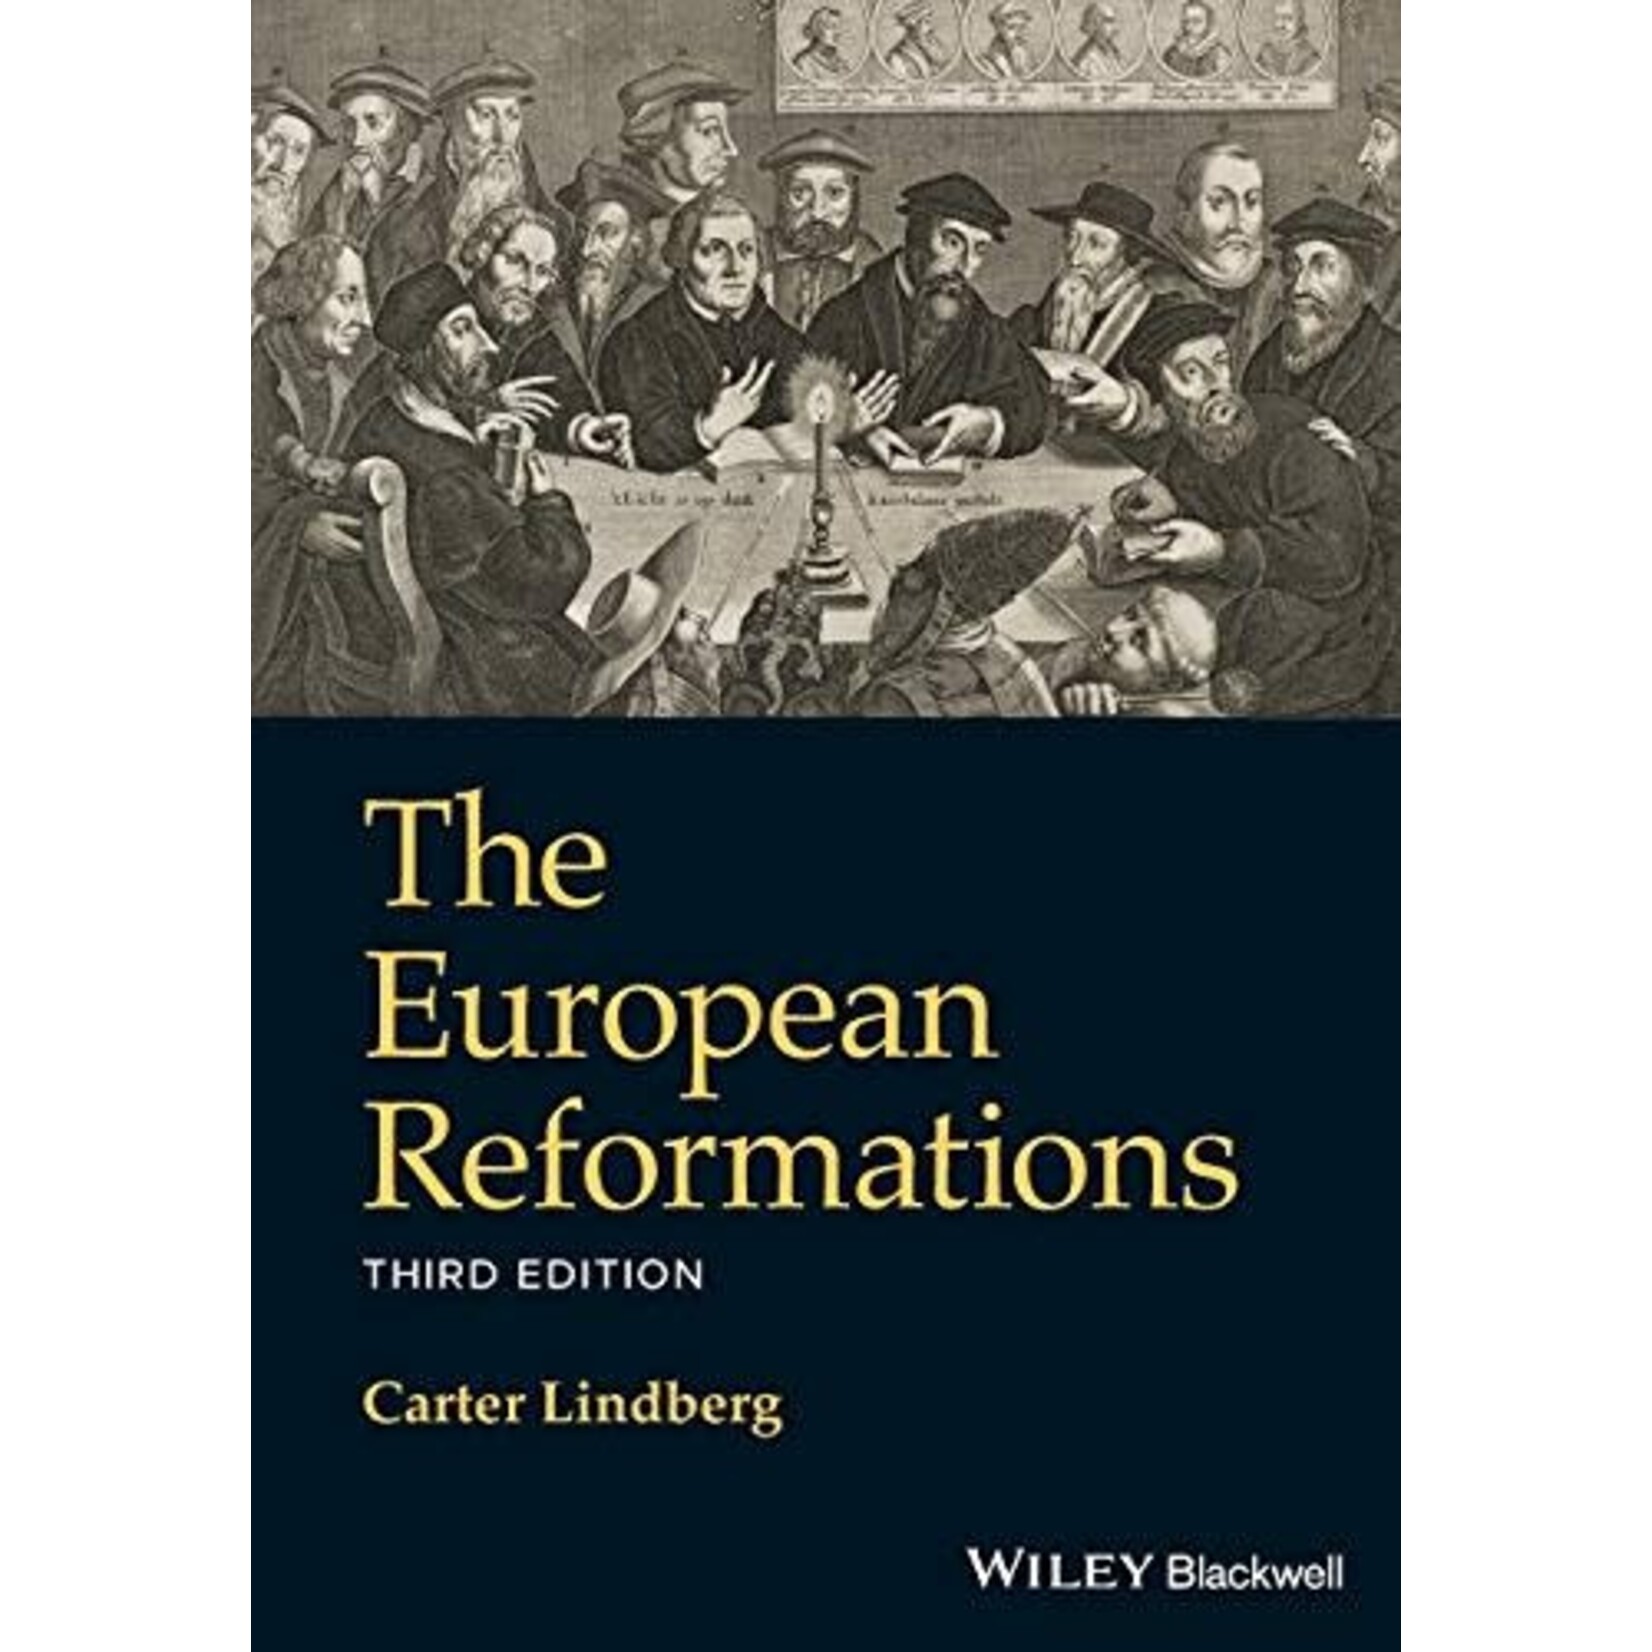 The European Reformations, 3rd Edition